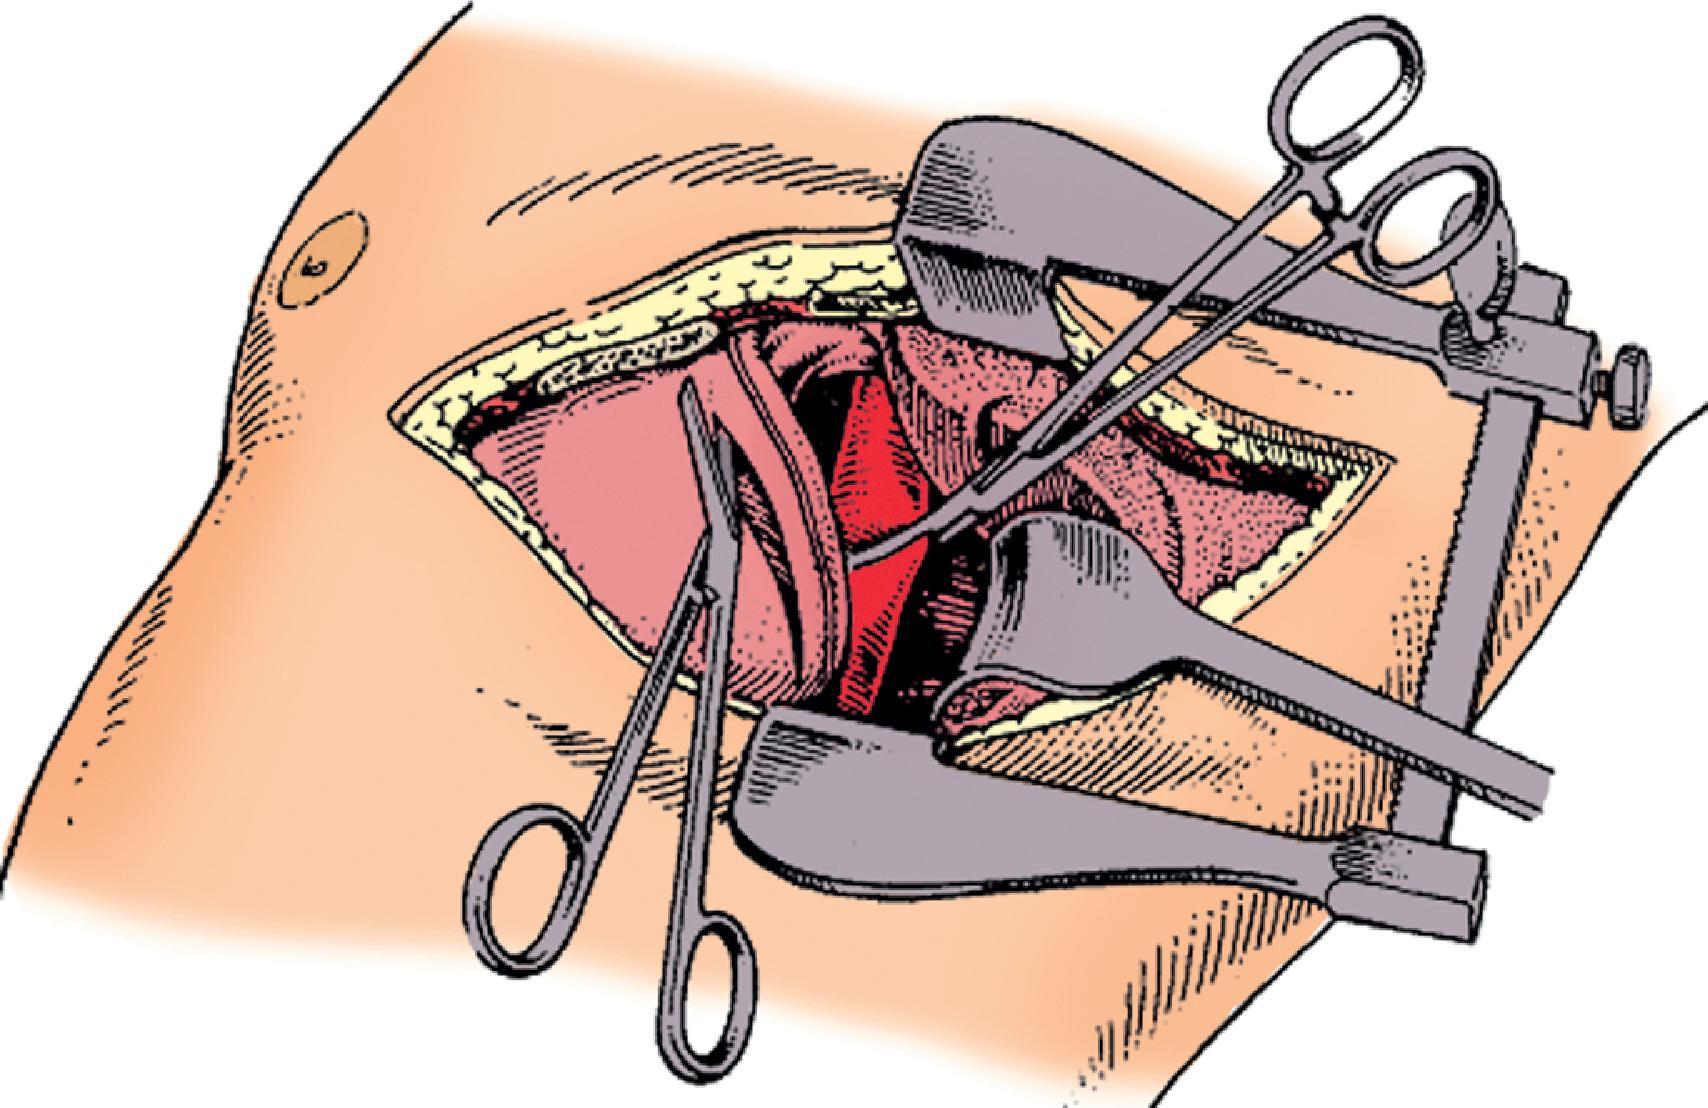 FIG. 2, The pericardiotomy is made anterior and parallel to the phrenic nerve. Note the clamp positioned across the thoracic aorta.